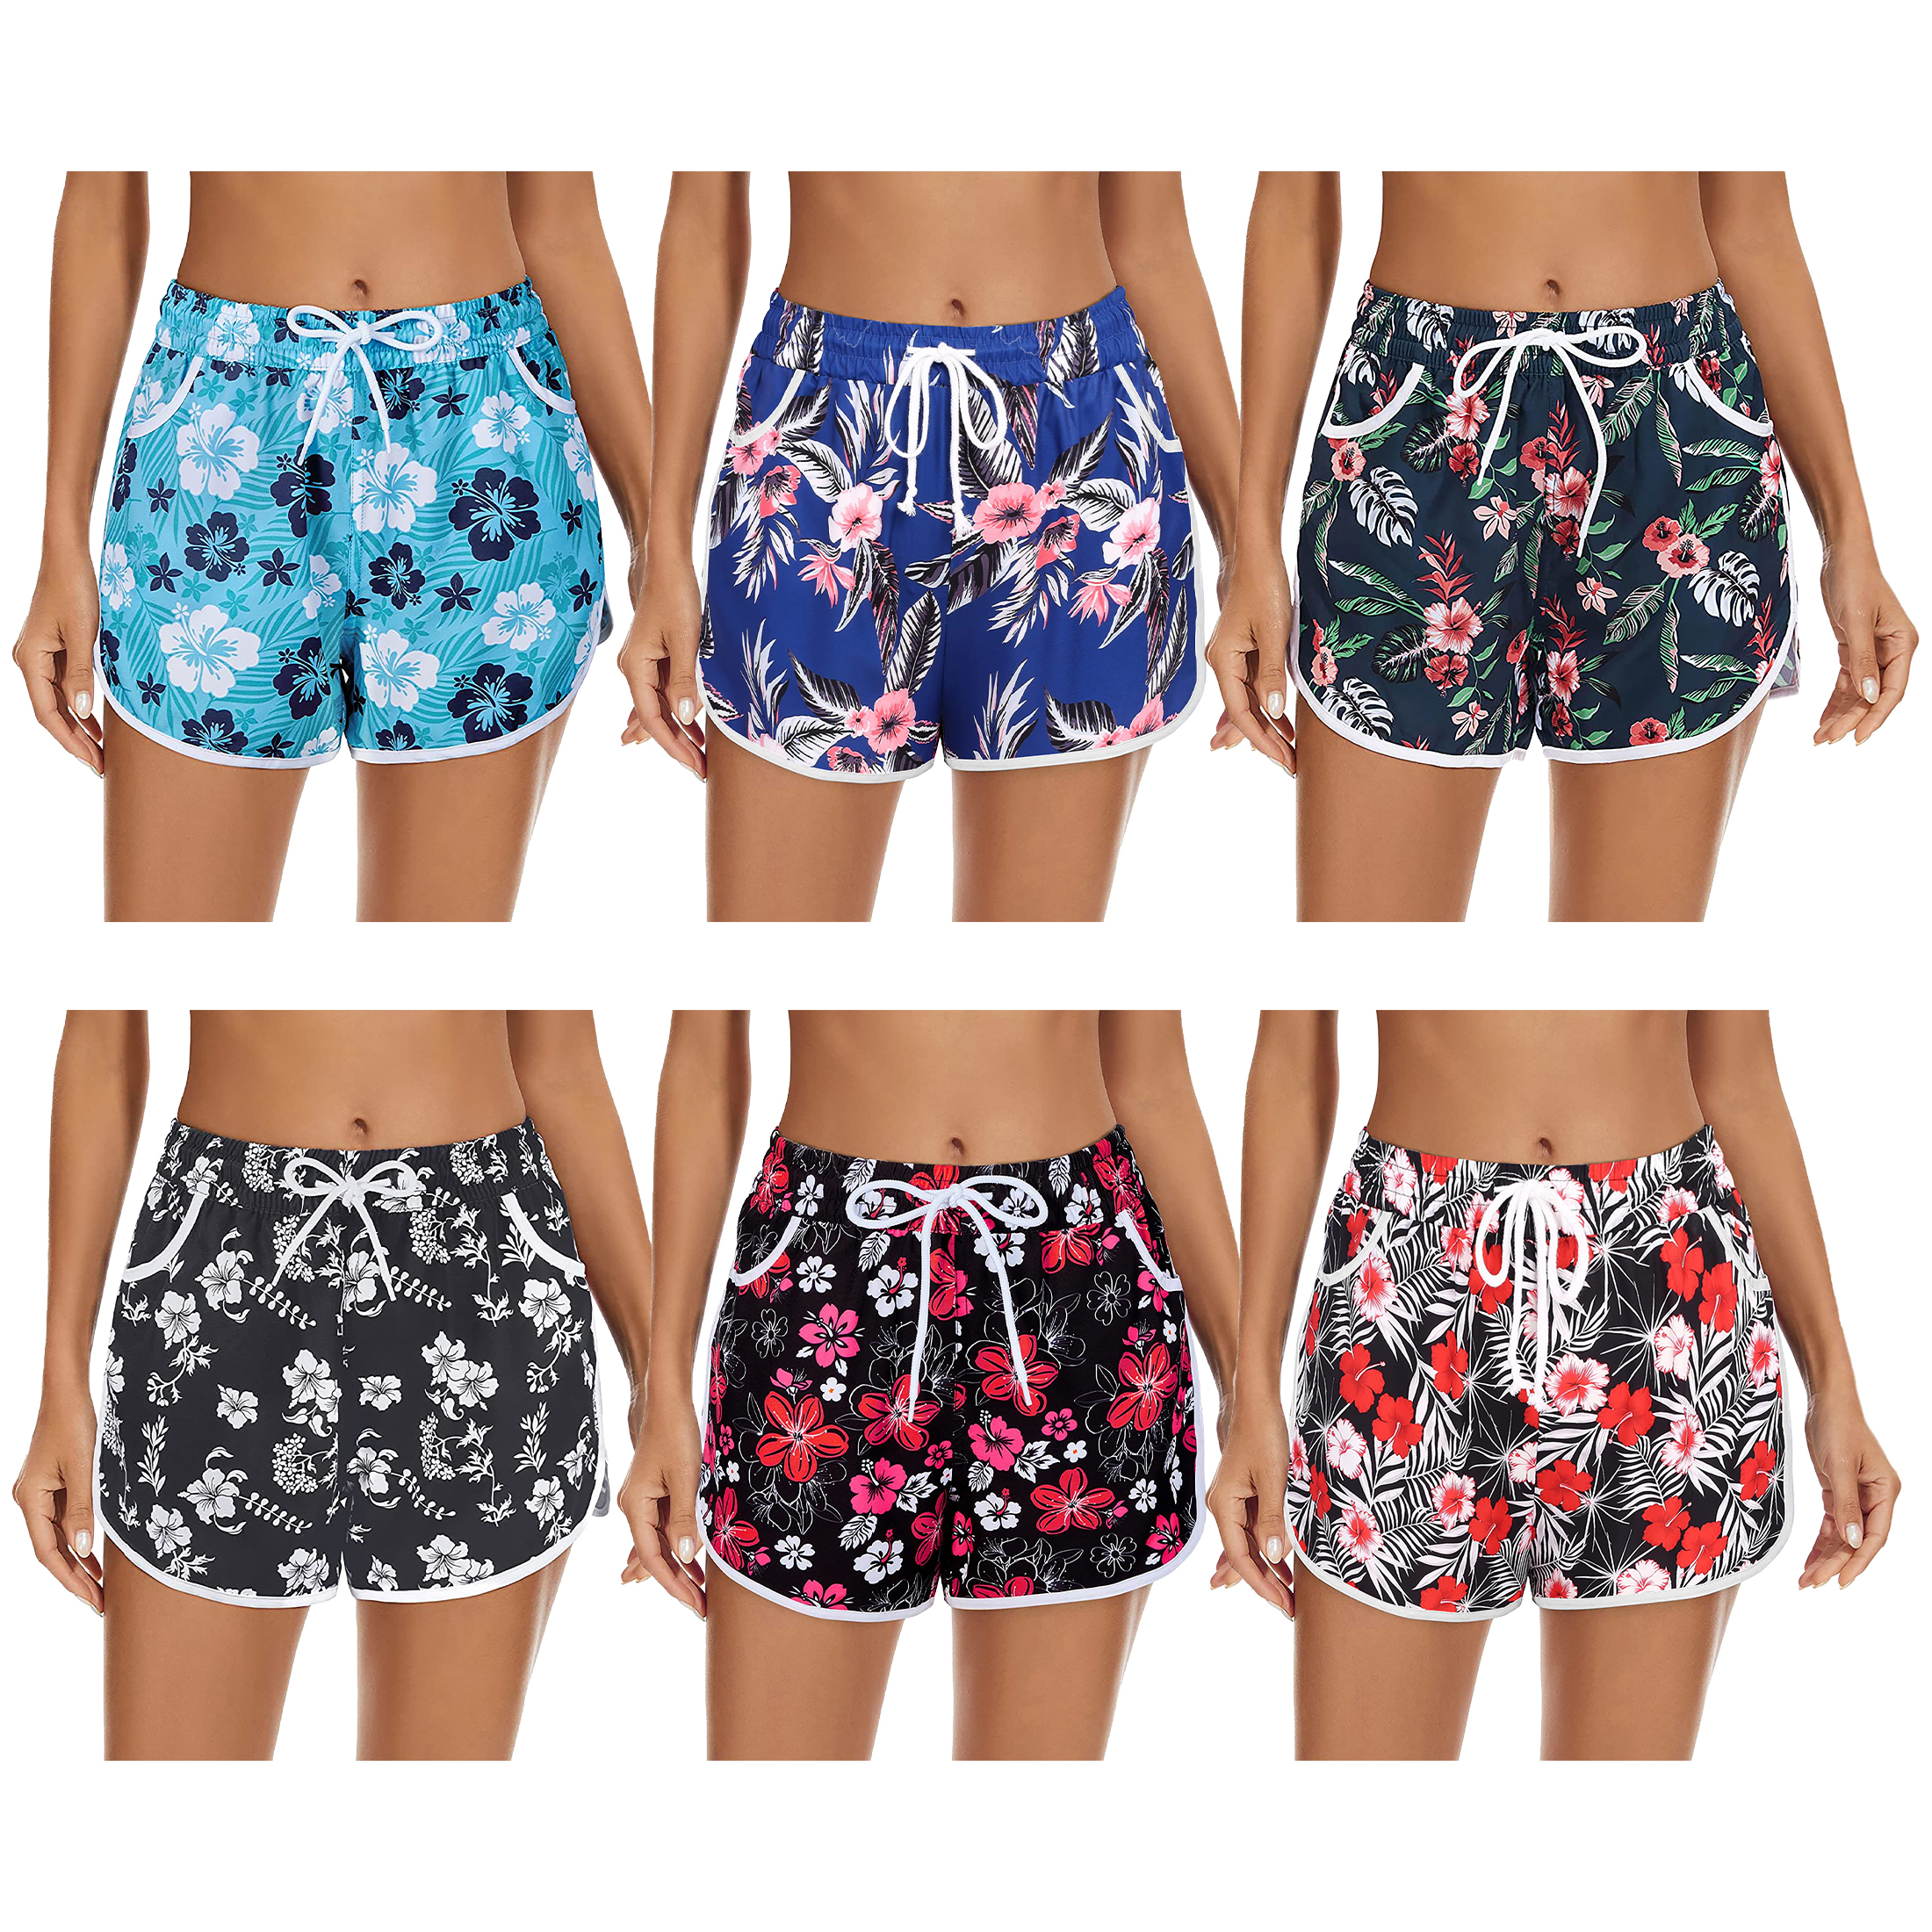 3-Pack Women's Floral Beach Shorts, Elastic Drawstring Summer Lounge Wear Pants, Soft Casual Dolphin Shorts With Pockets Quick Dry Plus Size